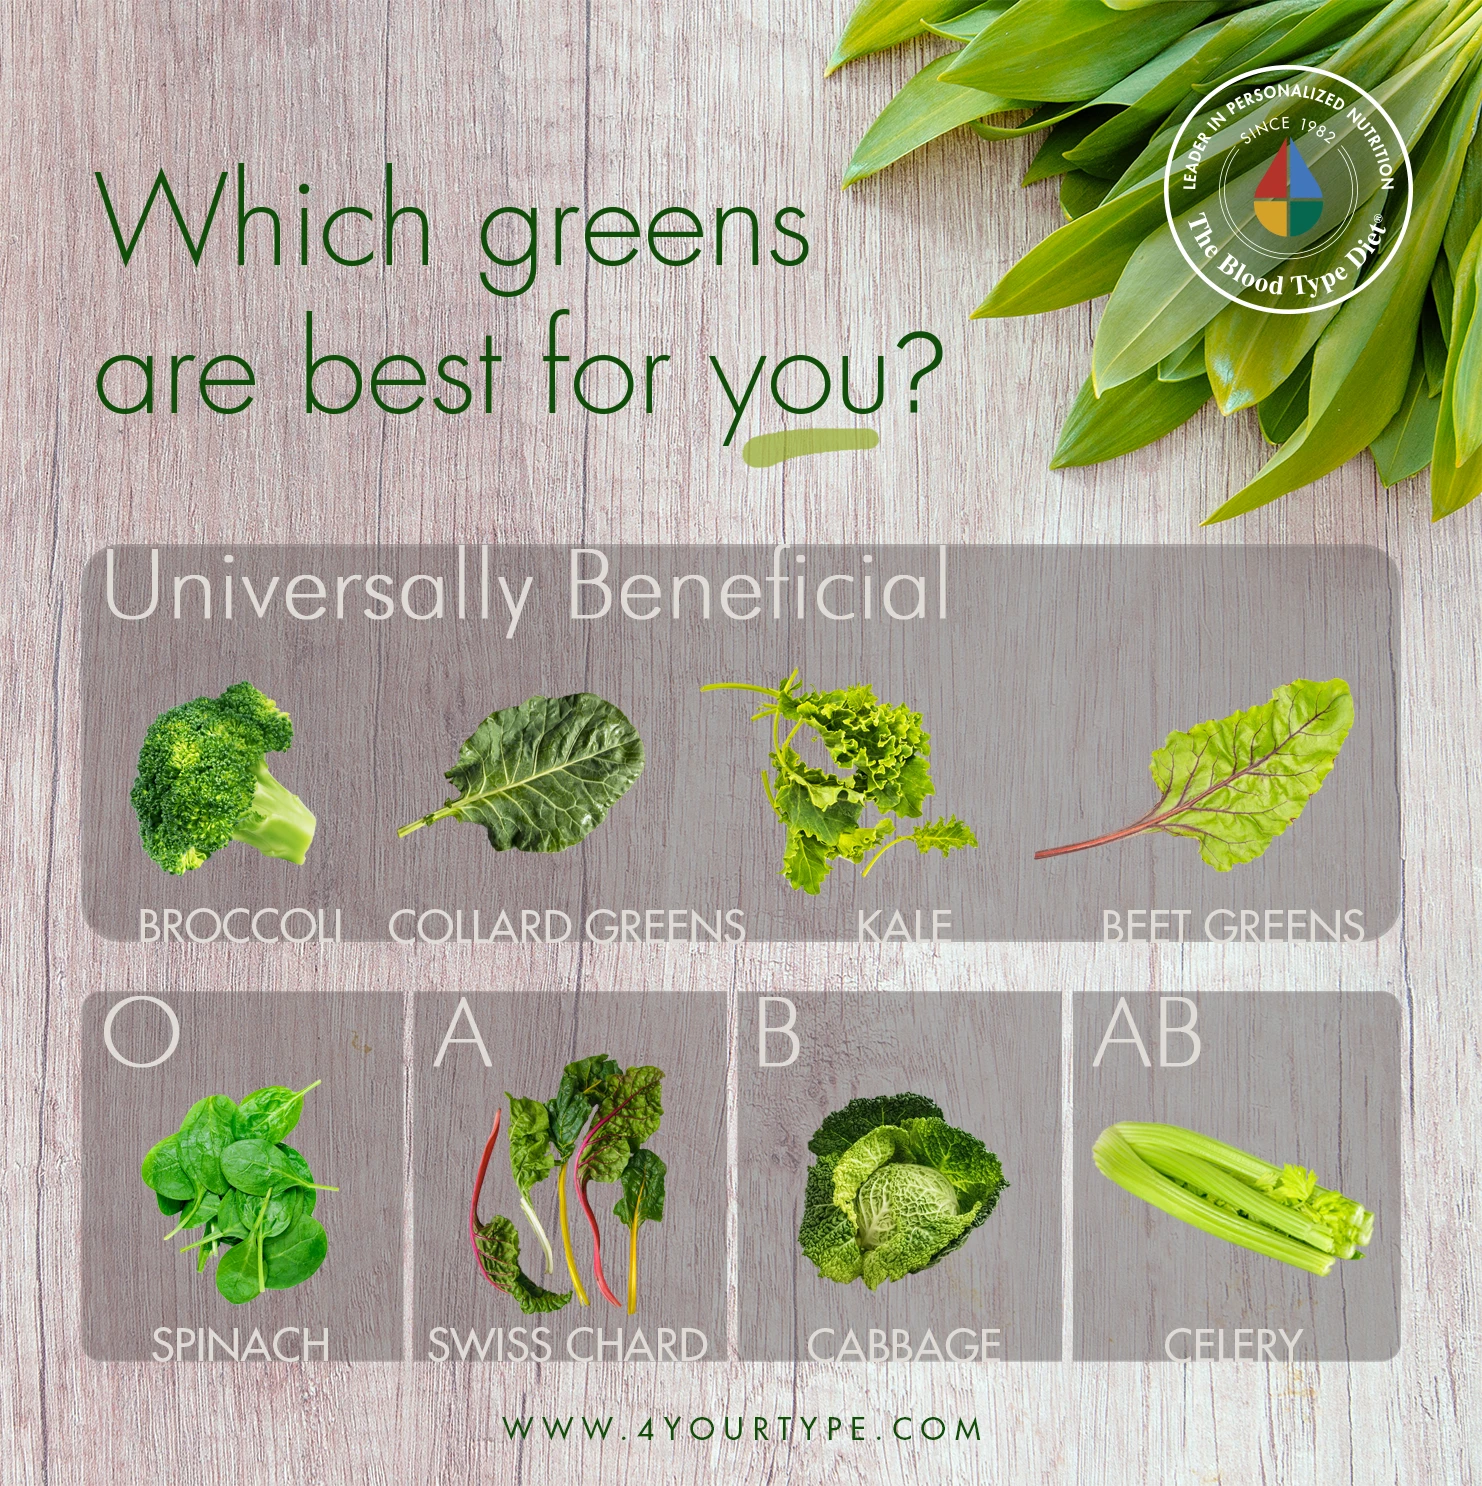 Are you eating the best greens for you?